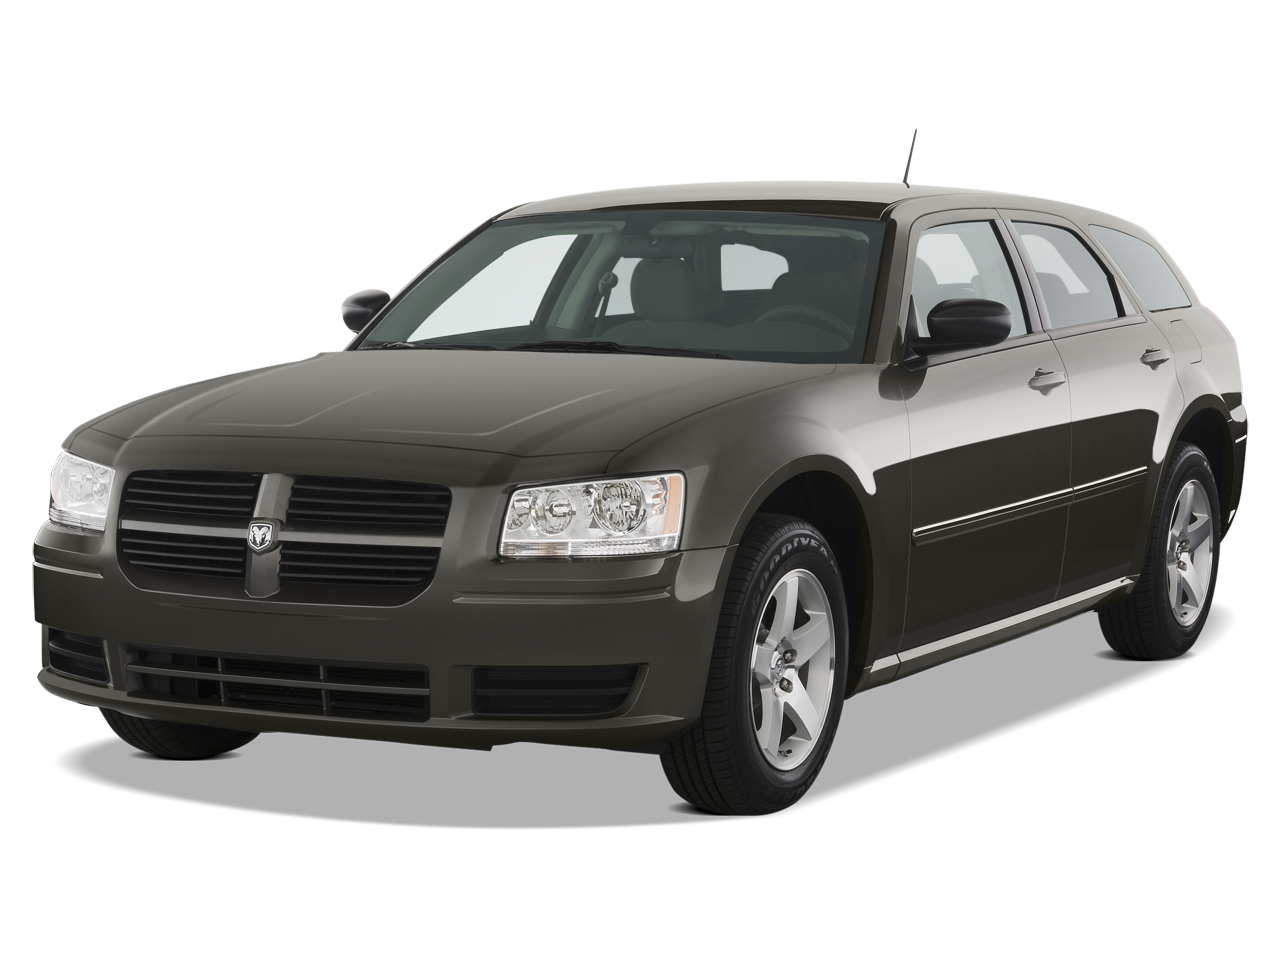 2008 Dodge Magnum Prices, Reviews, and Photos - MotorTrend